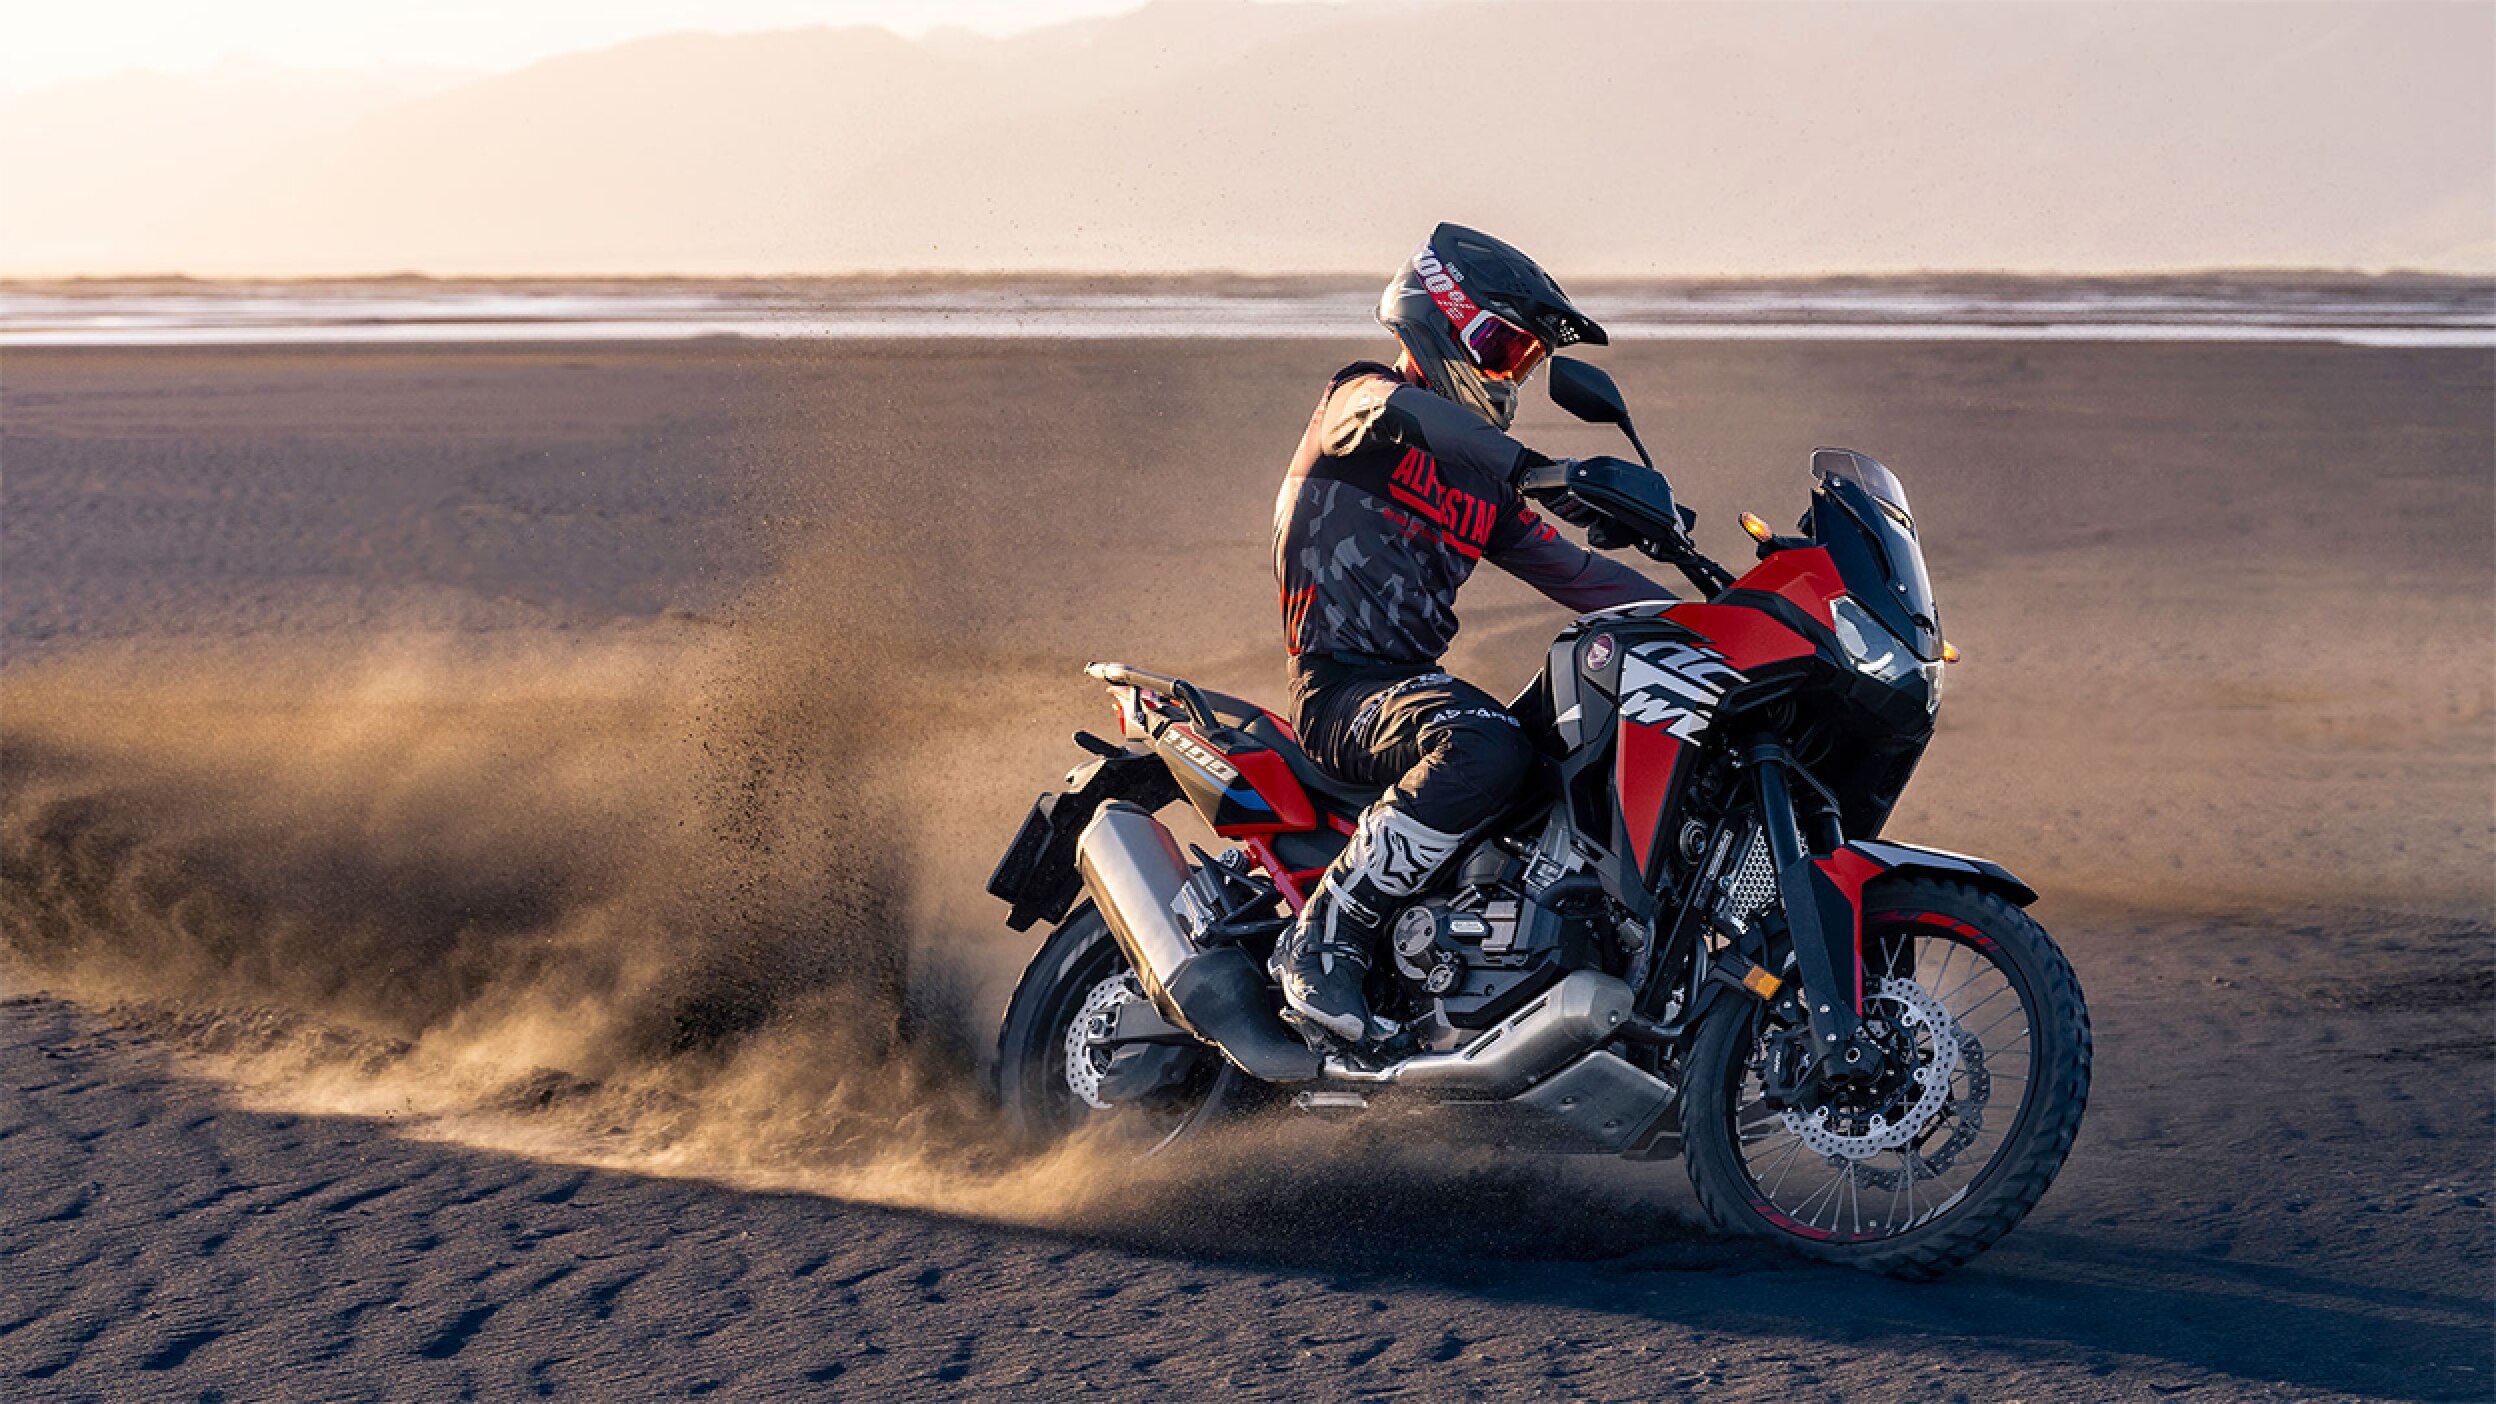 A professional rider on an Africa Twin kicking up dust